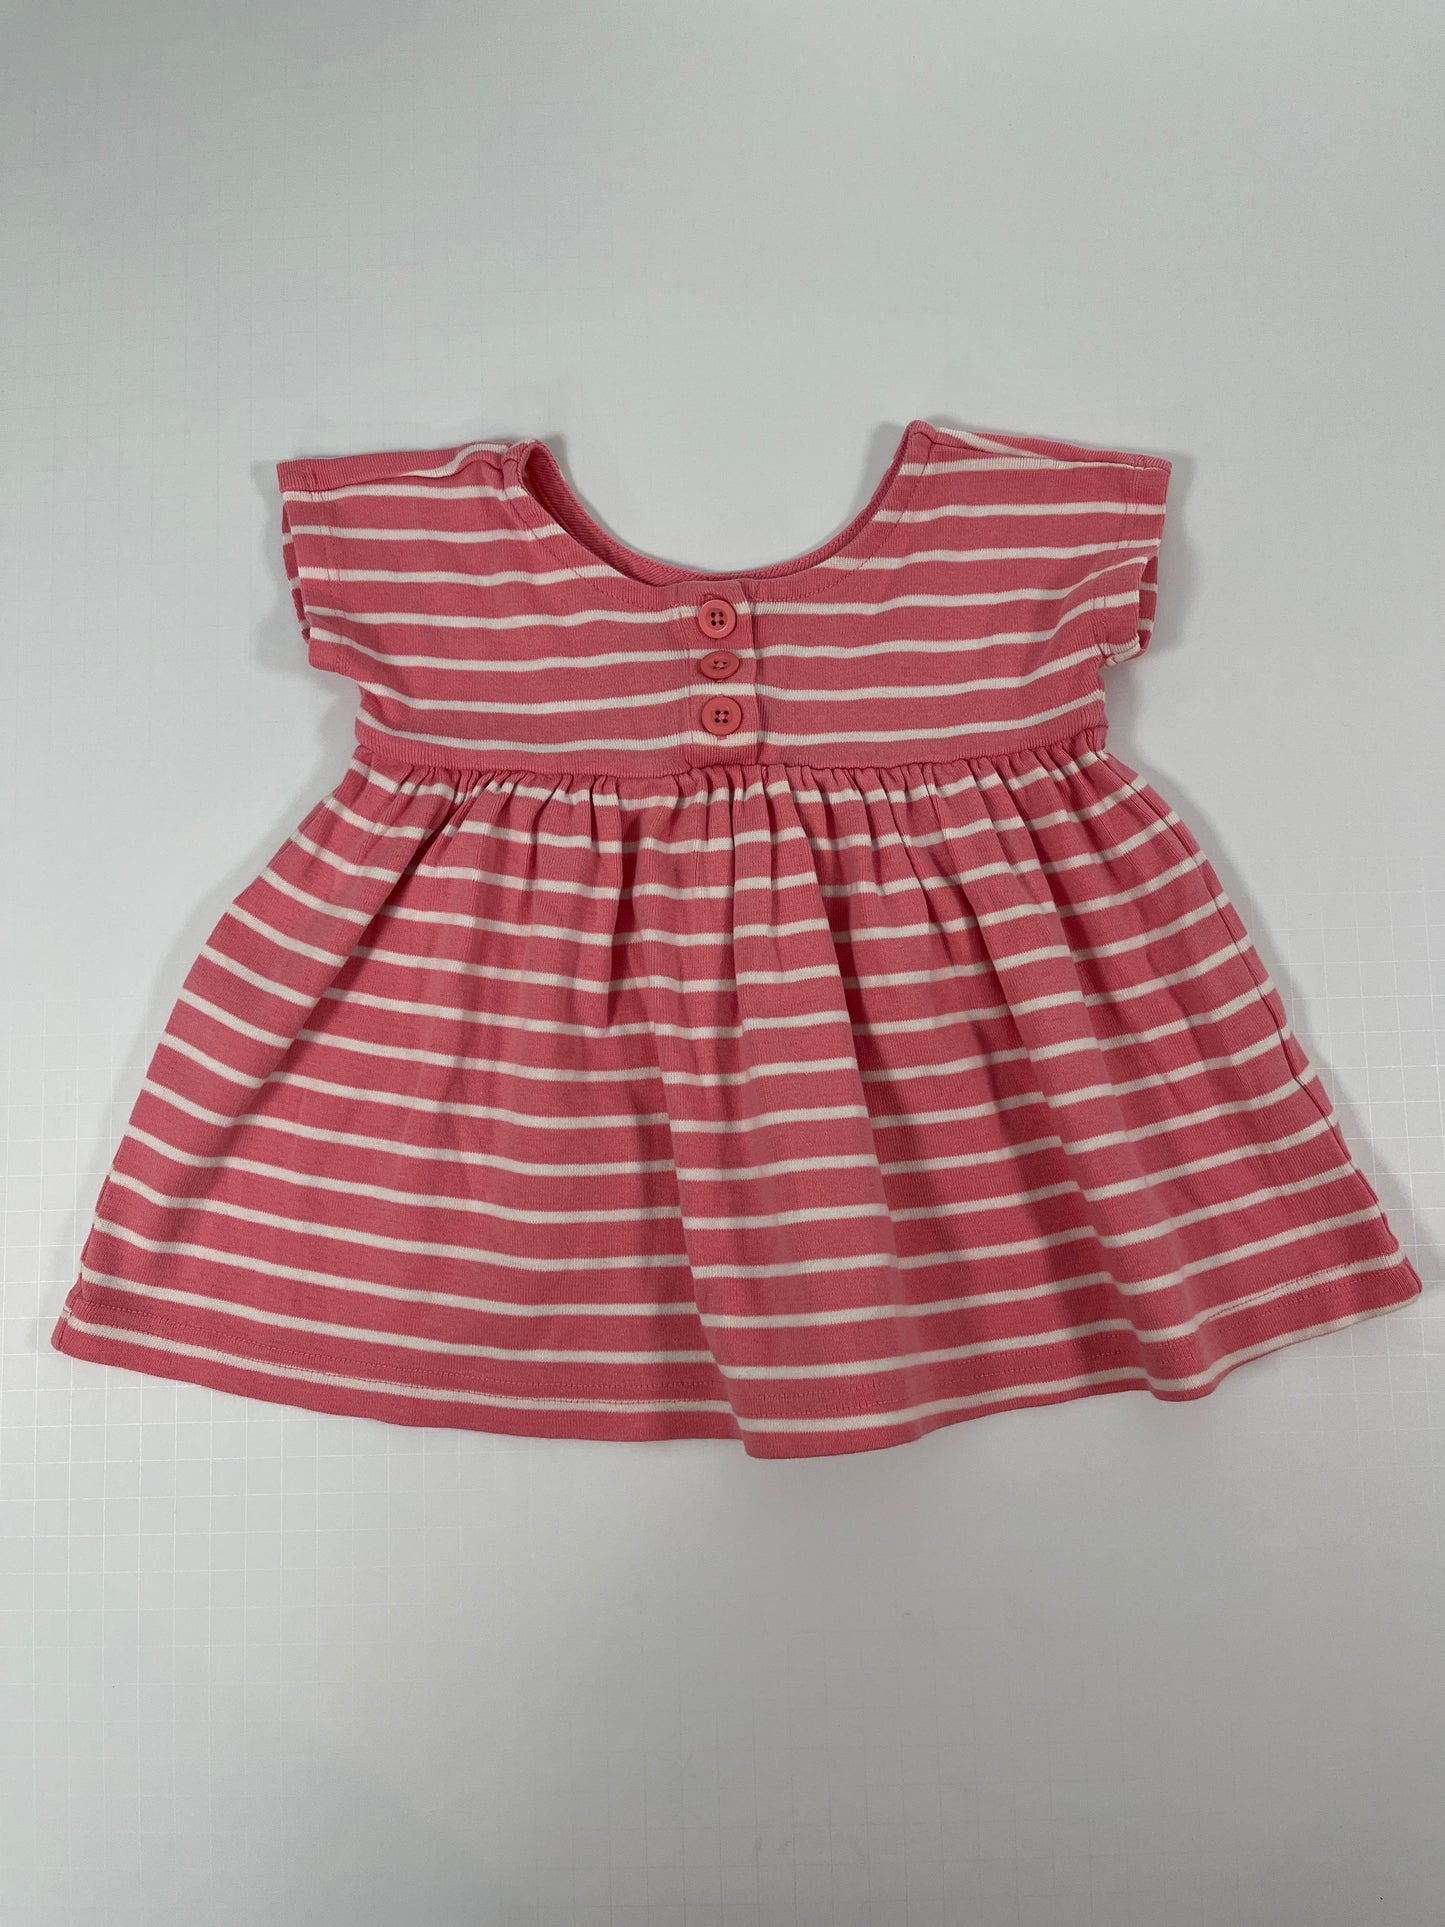 PPU 45242 Hanna Andersson 12-18m pink/white striped oversized top 